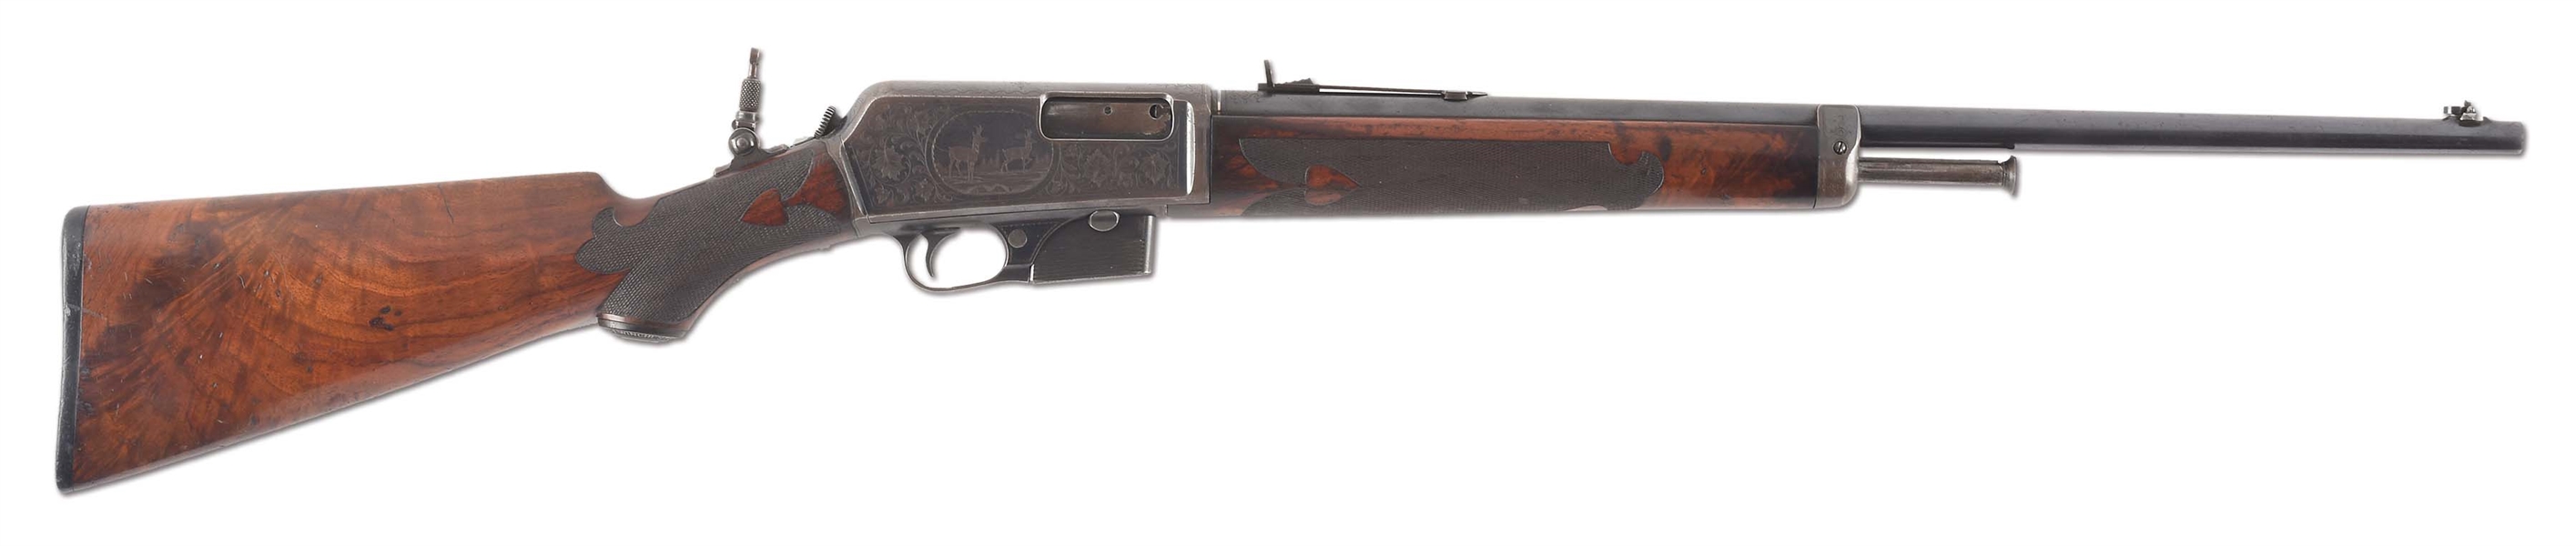 (C) EXTREMELEY RARE AND DESIREABLE FACTORY DOCUMENTED DELUXE FACTORY ENGRAVED WINCHESTER MODEL 1905 SELF-LOADING RIFLE.